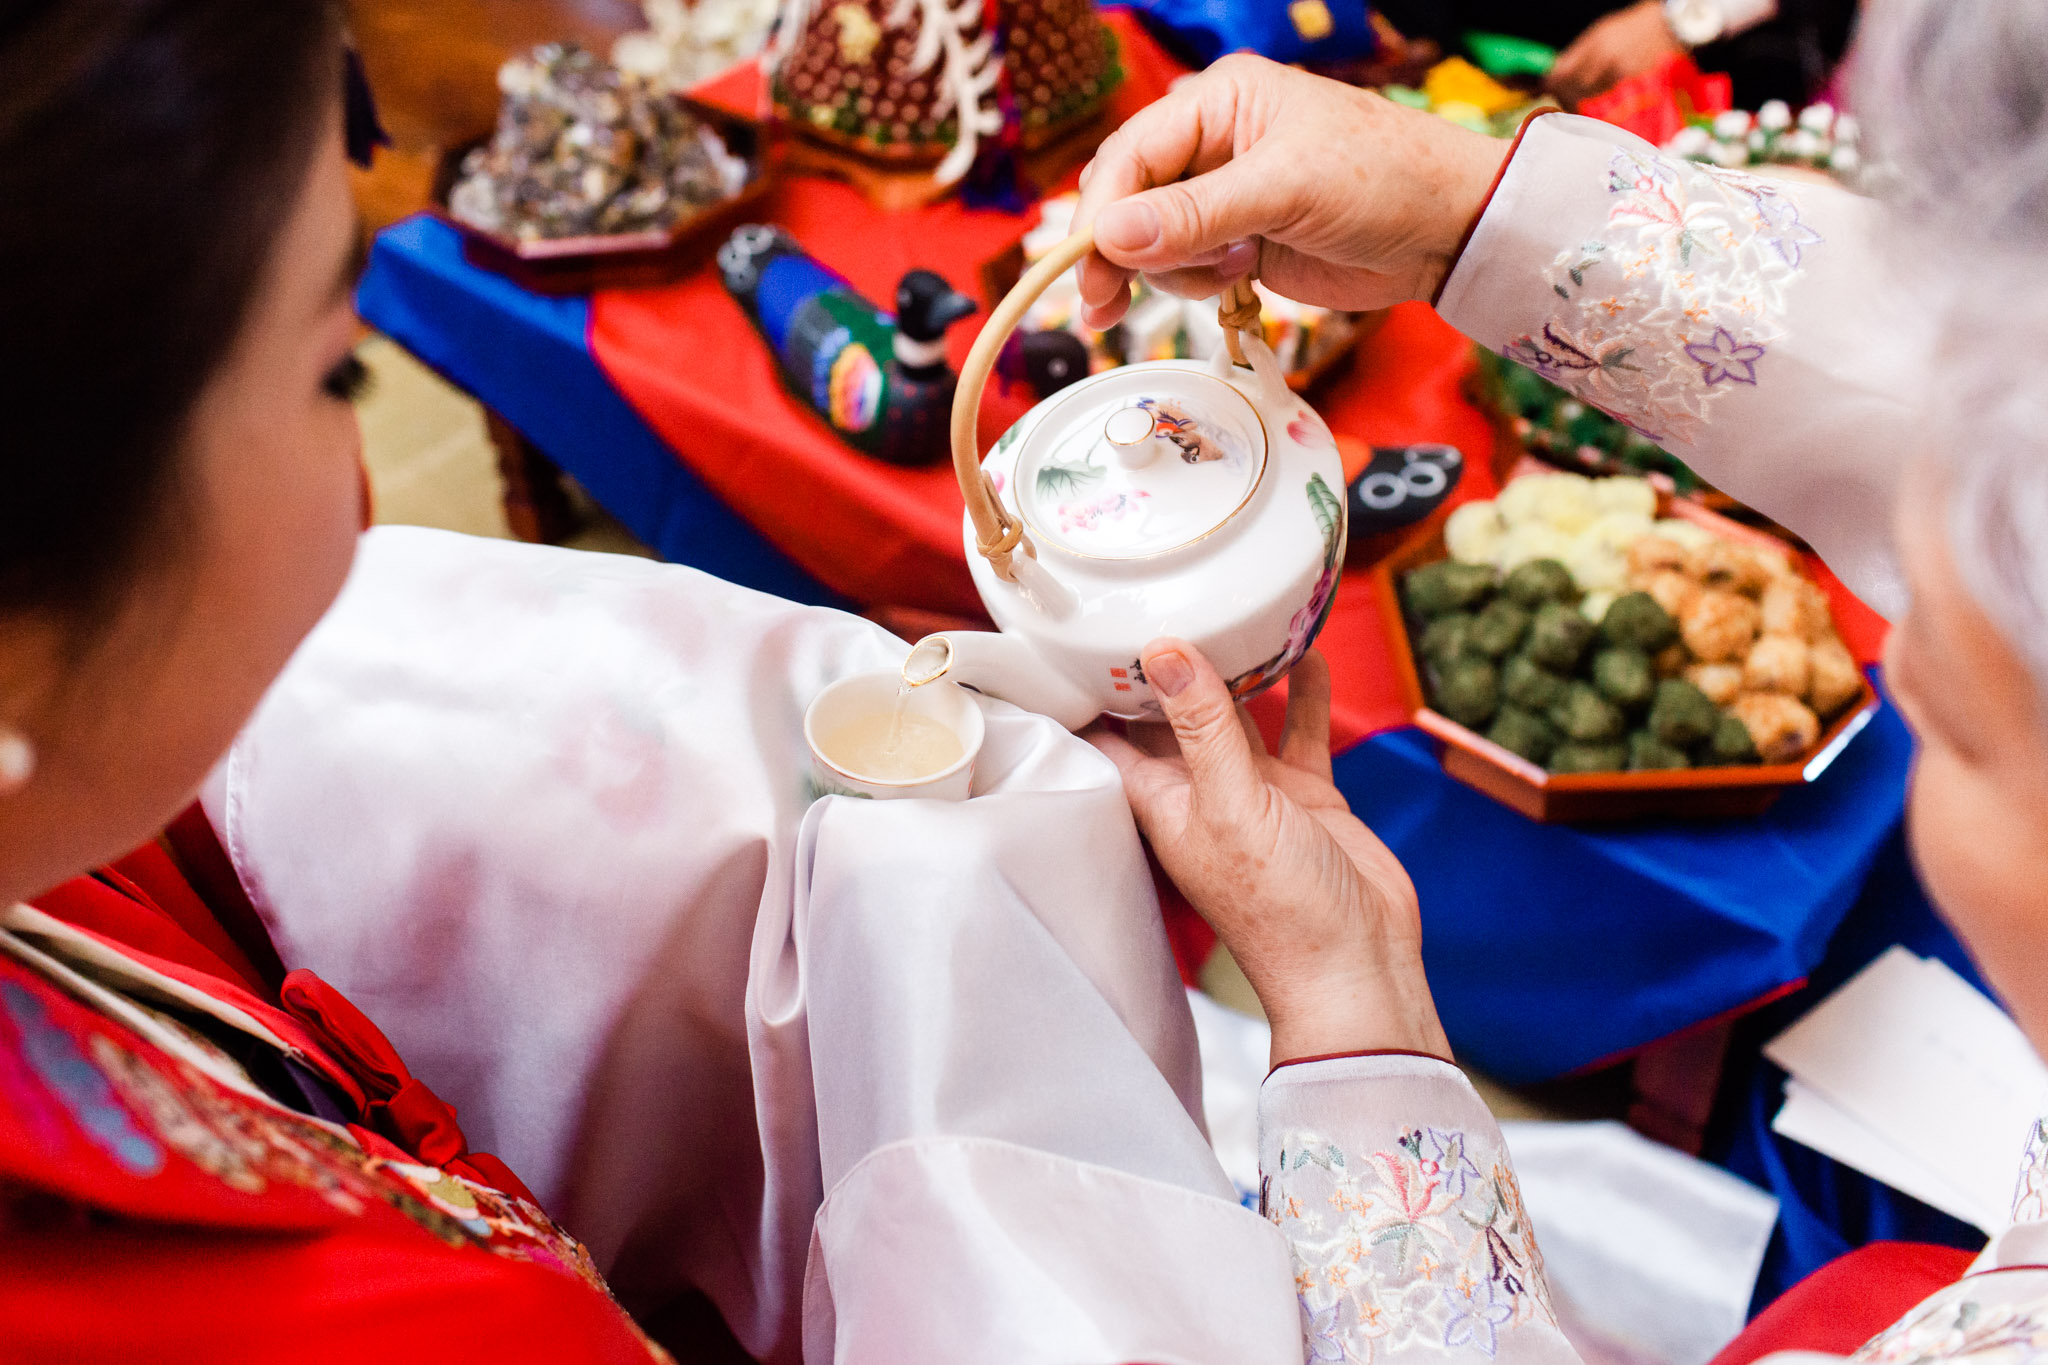 Colorful and vibrant, this tea ceremony was so much fun to photograph, says Summerour Studio wedding photographer Rebecca Cerasani.